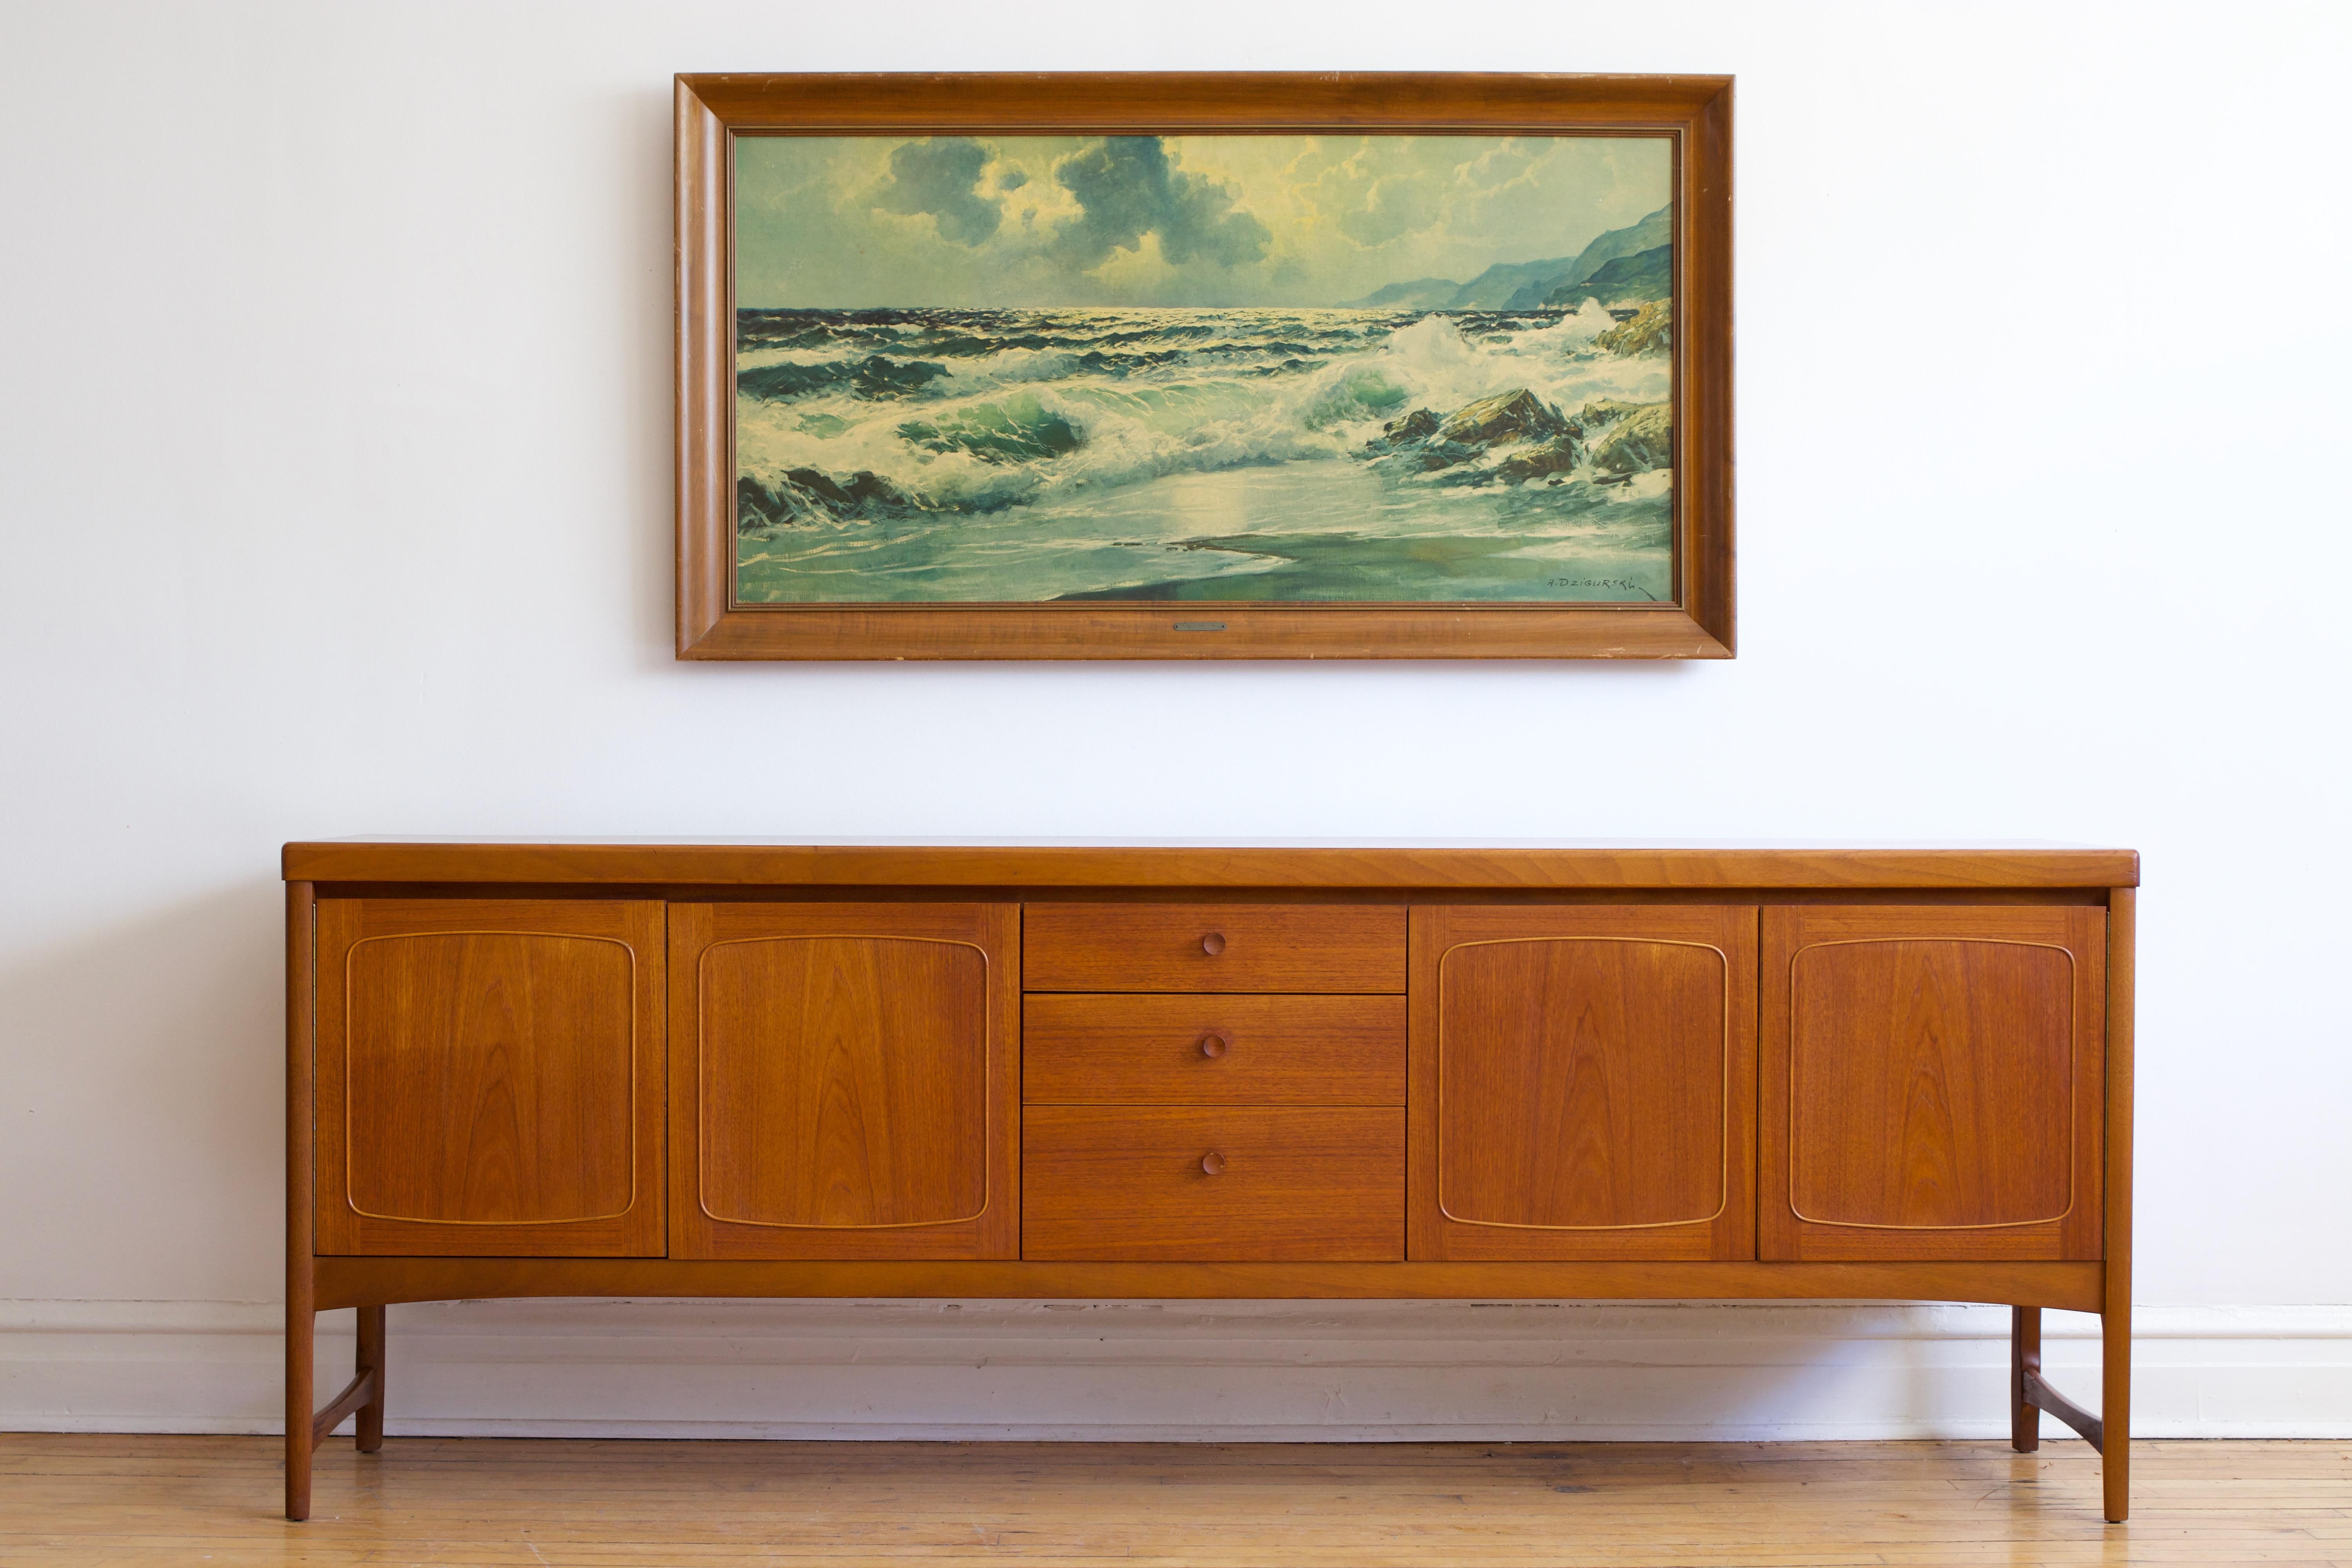 Mid-century Danish Modern extra large teak wood sideboard.
Made in London by Nathan Furniture.
Just imported from England to Chicago.
This one is slightly taller and longer than the average sideboard.
Three dovetailed drawers; top drawer holds